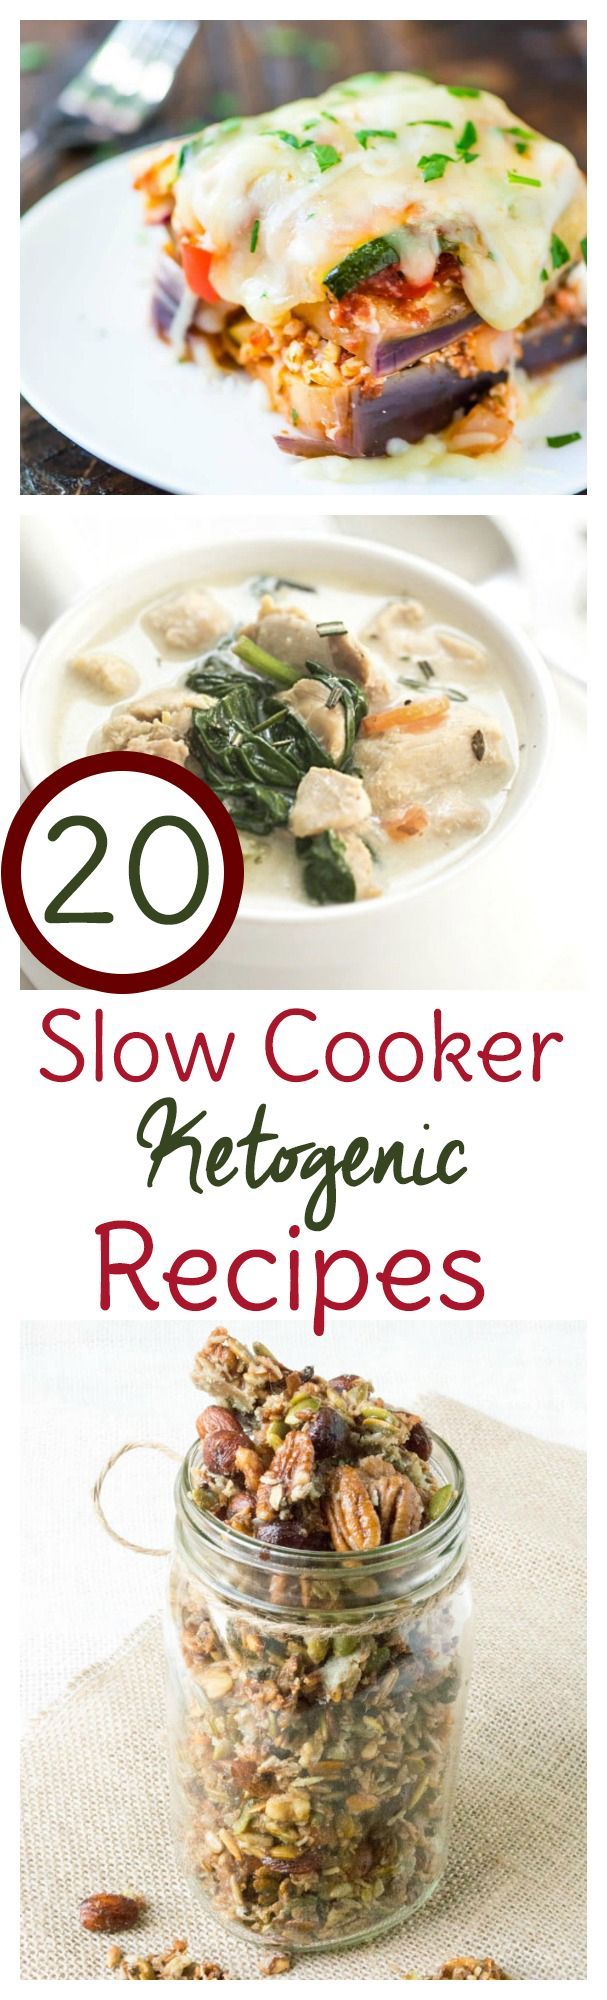 The ketogenic diet doesn’t have to be hard. These 20 Crock Pot keto recipes make life on a low carb, high fat way of eating just a